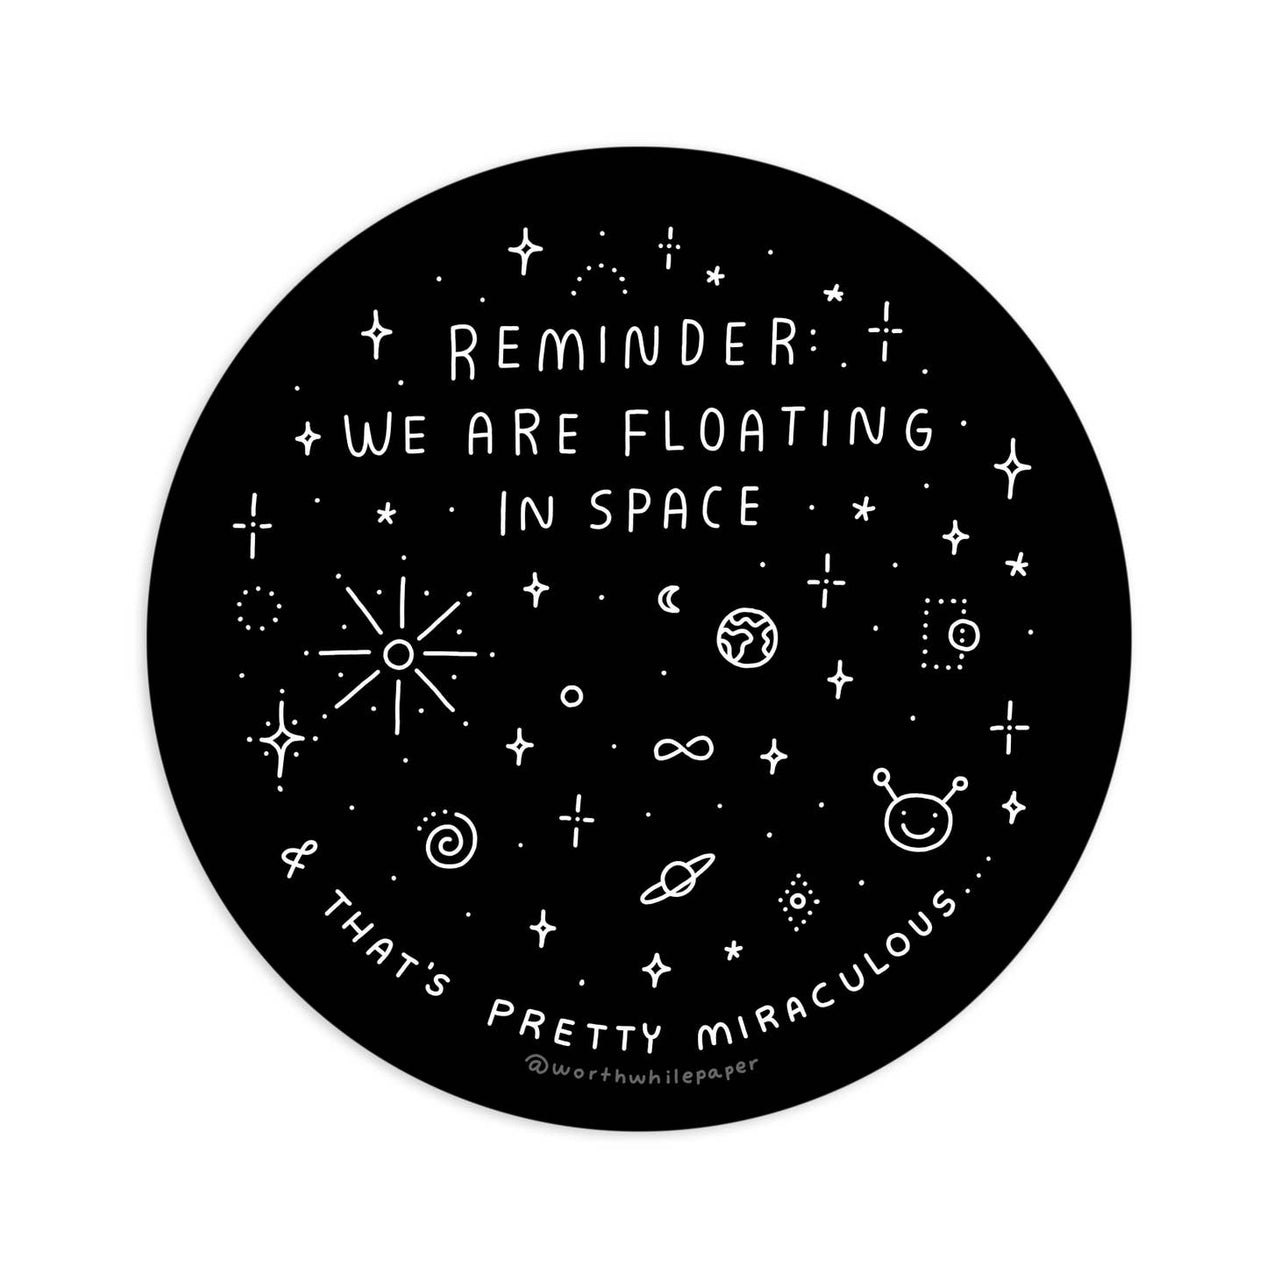 Worthwhile Paper - Reminder: We Are Floating in Space Sticker